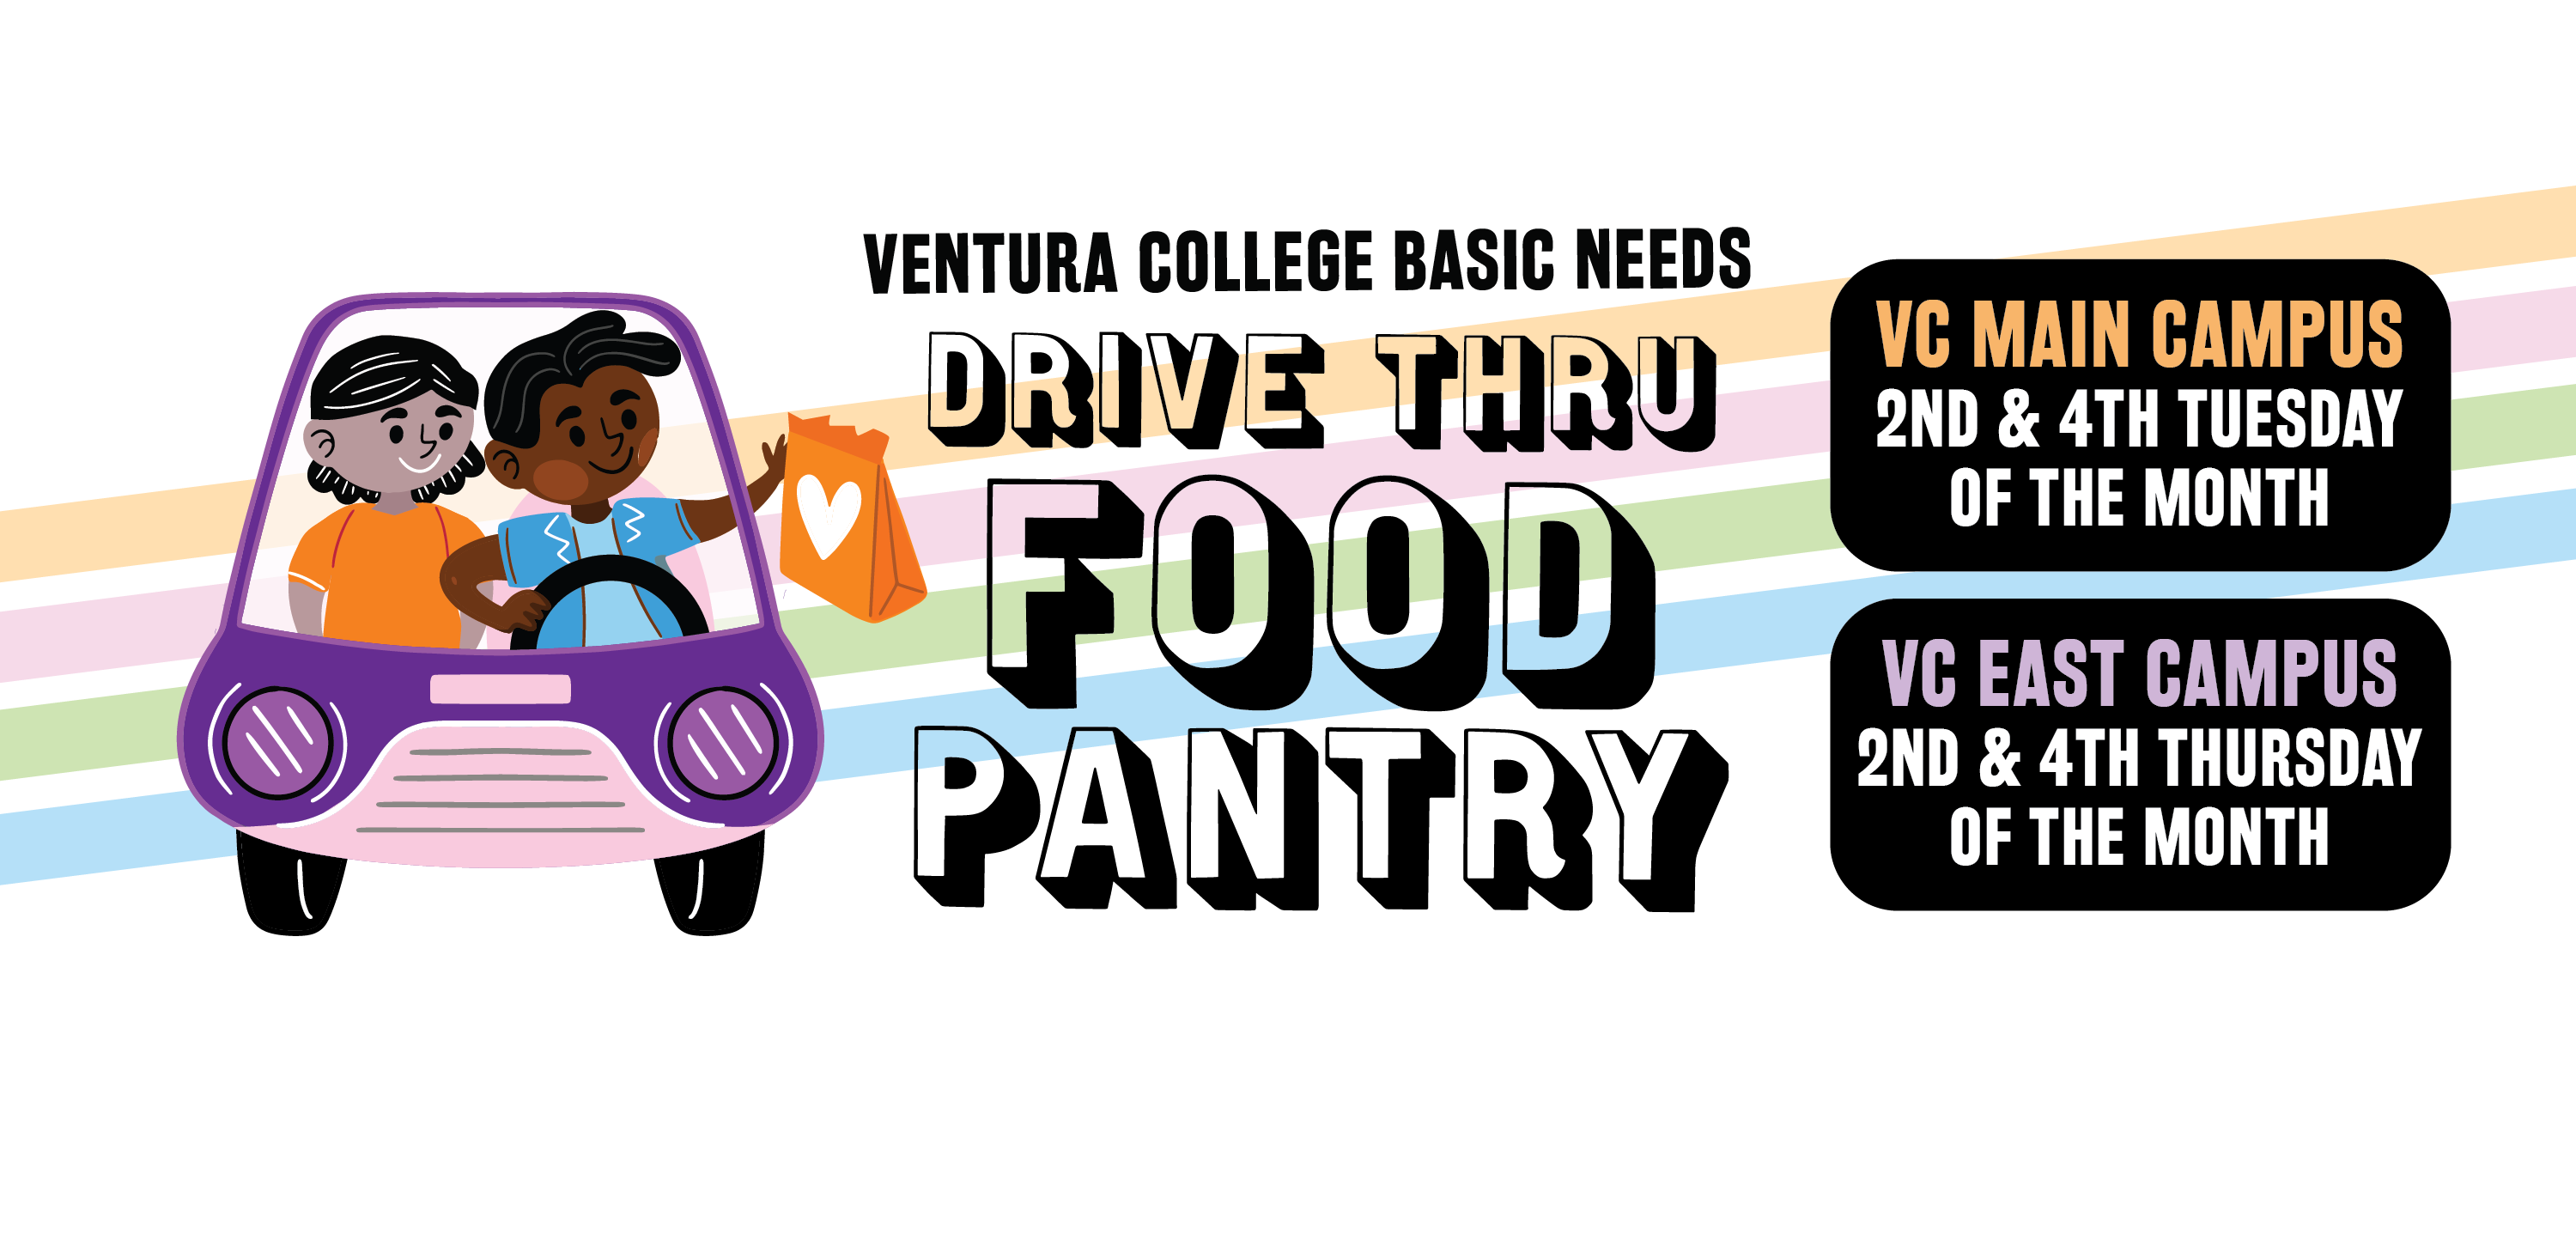 Graphic of two people in a car with text that reads Ventura College Basic Needs Drive Through Food Pantry Ventura College Main Campus Second and Fourth Tuesday of the month, Ventura College East Campus second and fourth thursday of the month.